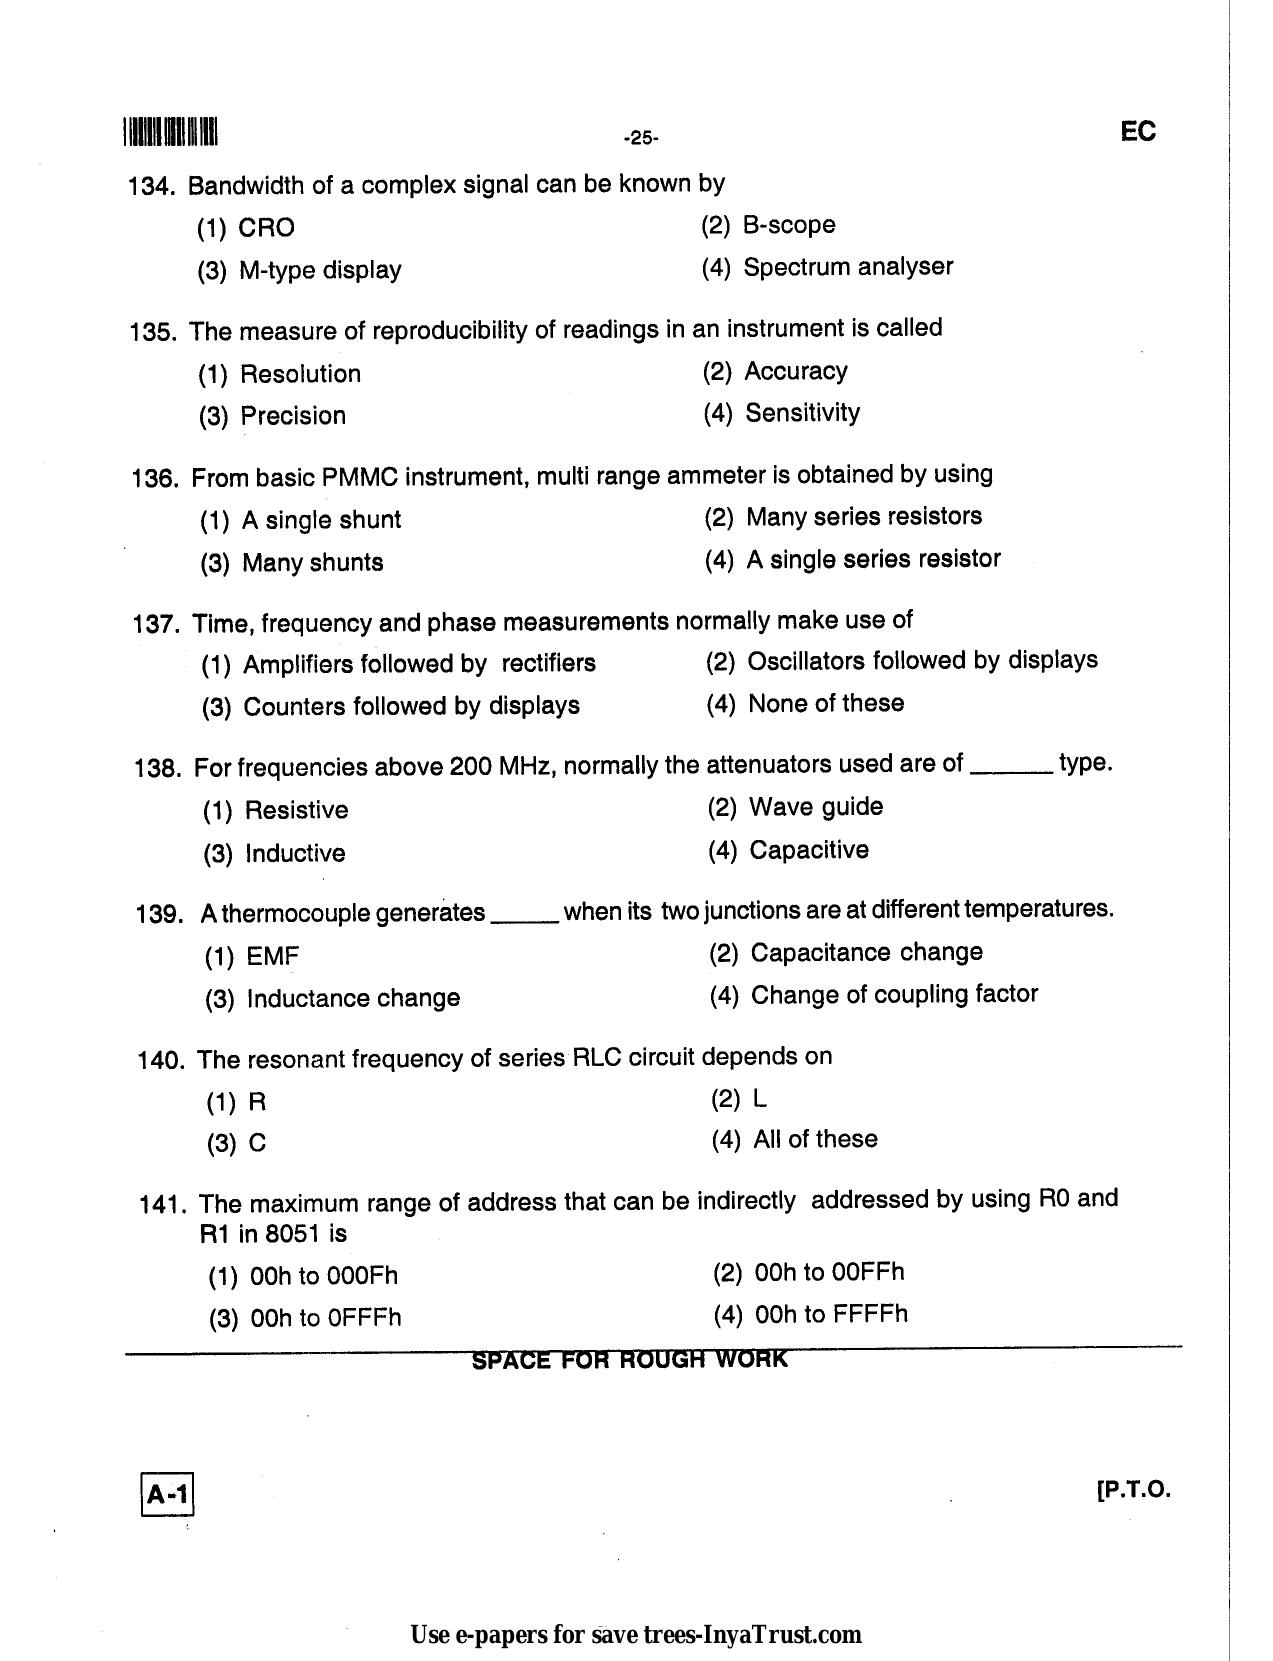 Karnataka Diploma CET- 2013 Electronics and Communication Engineering Question Paper - Page 25